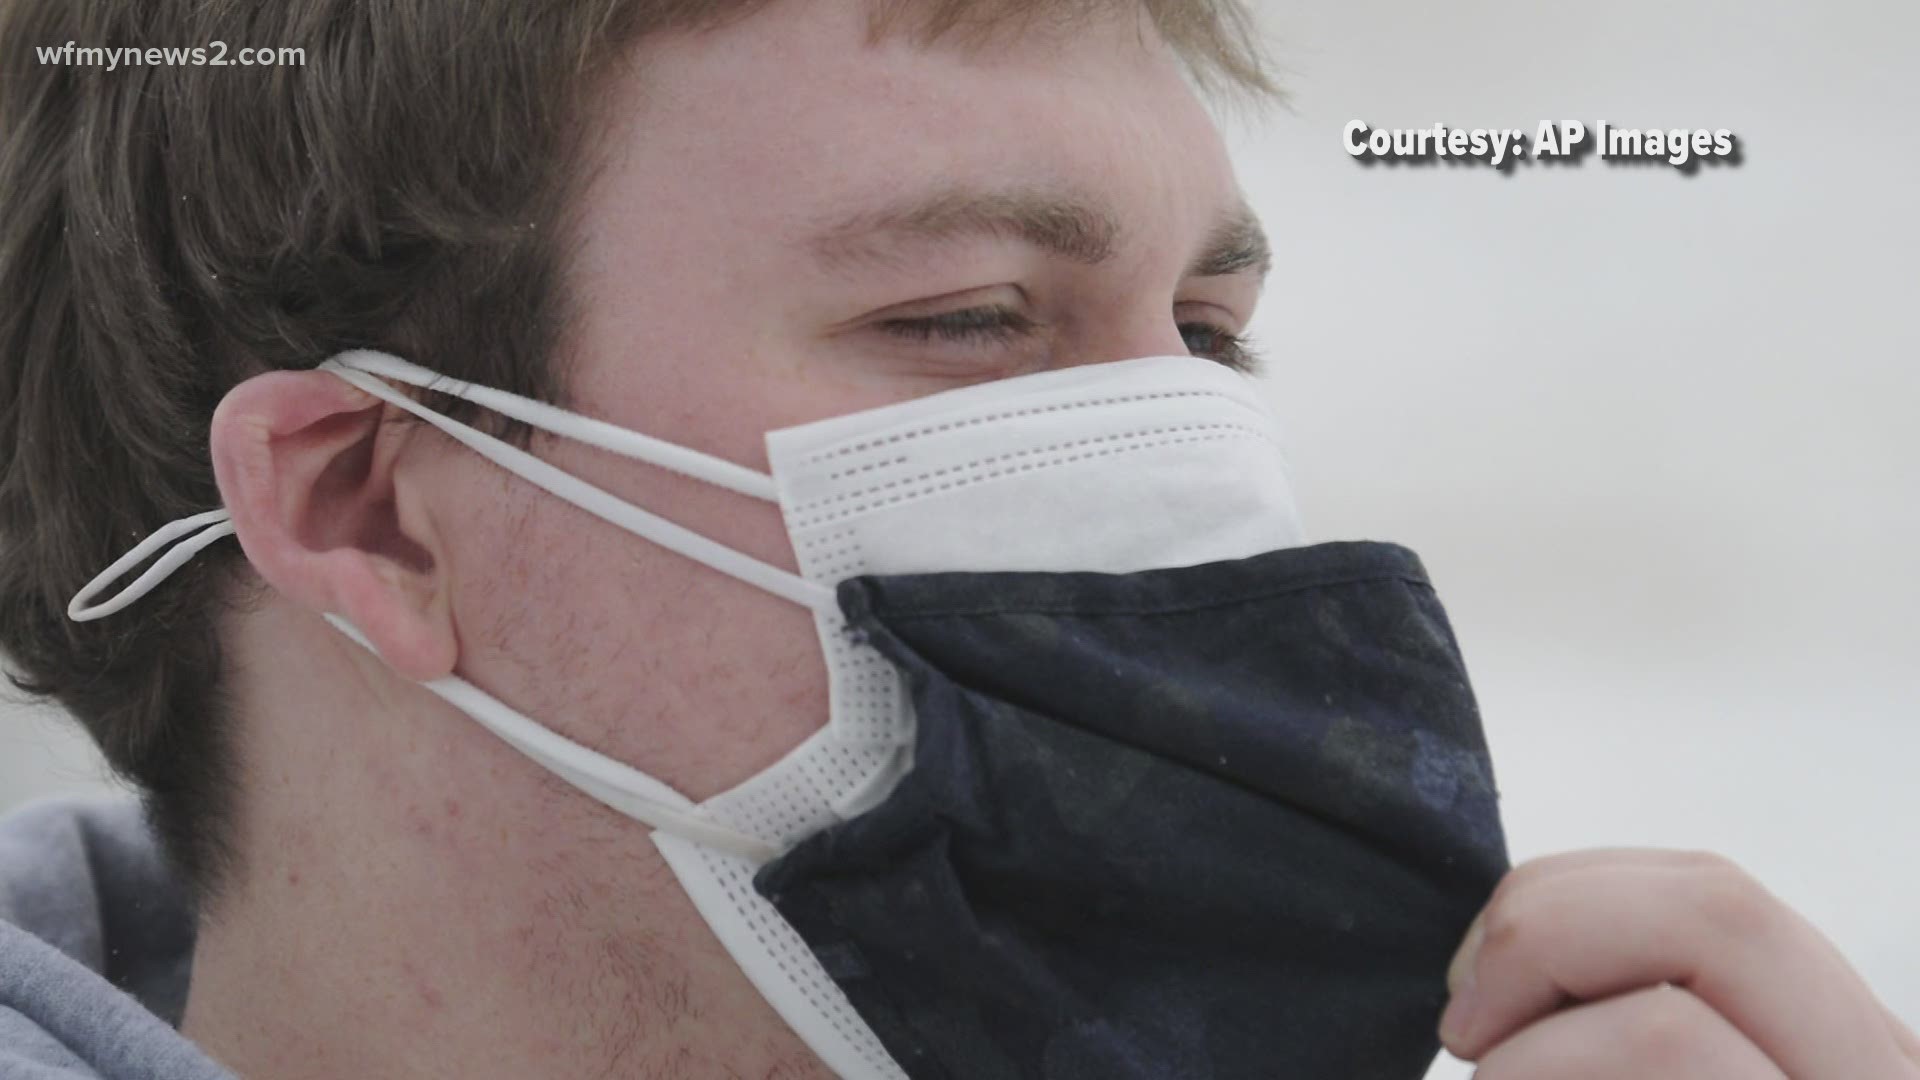 North Carolina confirmed a COVID-19 variant case, so some folks have opted to wear two masks instead of one.